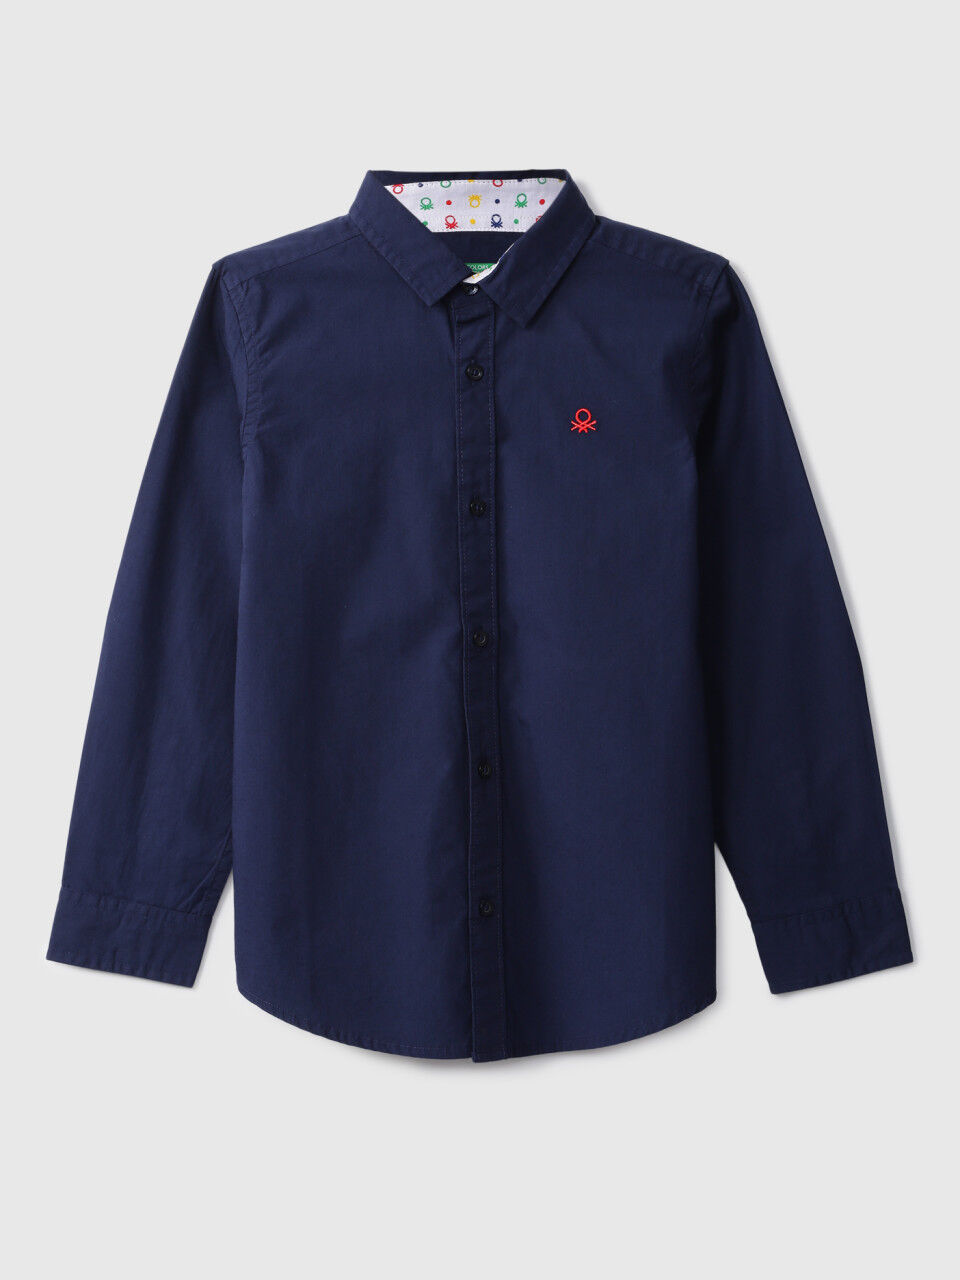 United Colors Of Benetton Boys Navy Blue Solid Shirt